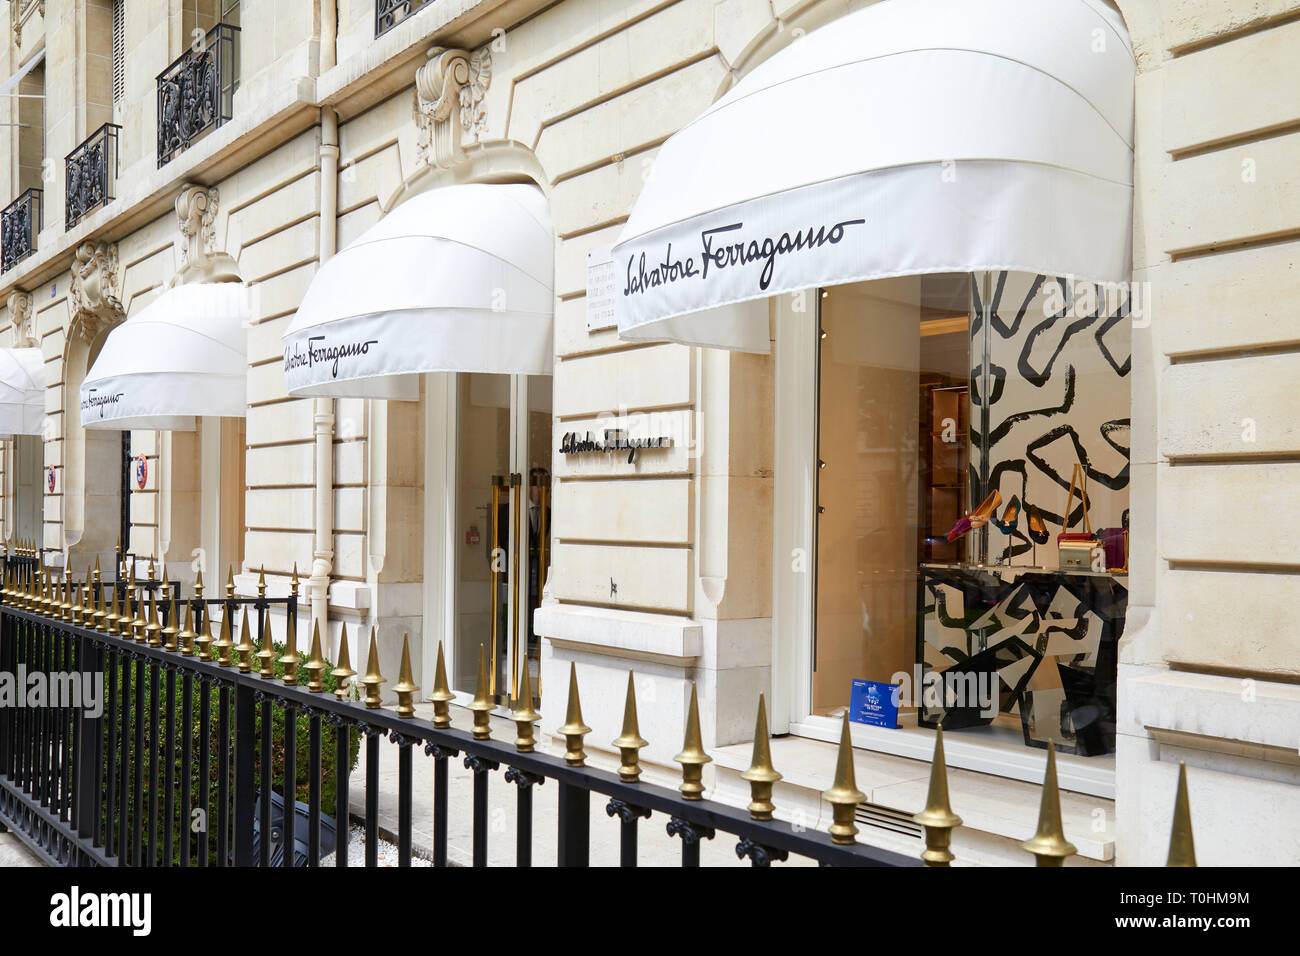 Sign Salvatore Ferragamo High Resolution Stock Photography and Images -  Alamy